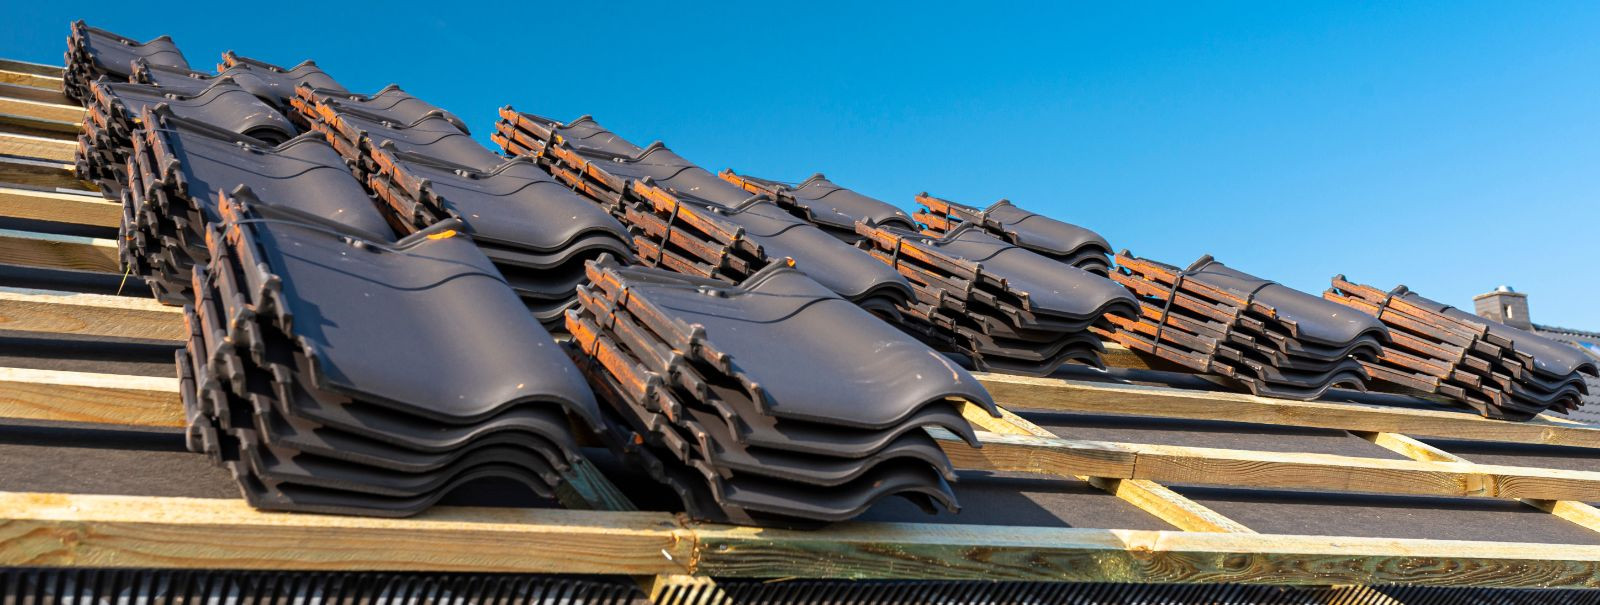 As a homeowner, your roof is your first line of defense against the elements. It's crucial to recognize when it's time for a roof redo to maintain your home's i